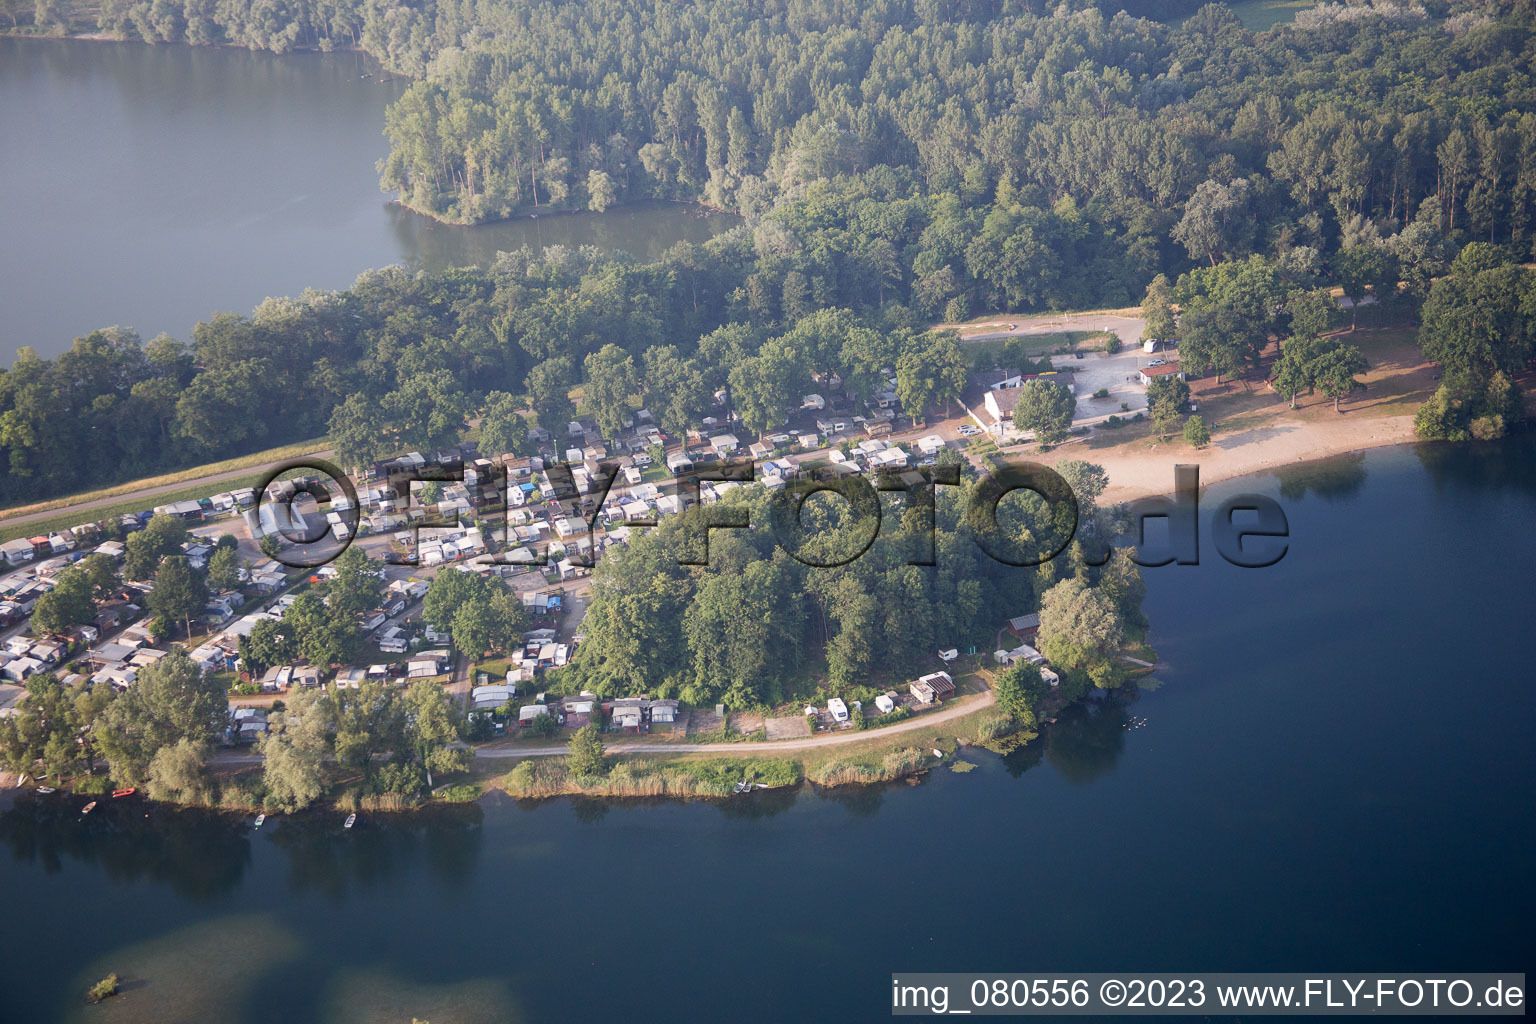 Aerial view of Campsite Lingenfeld in Lingenfeld in the state Rhineland-Palatinate, Germany